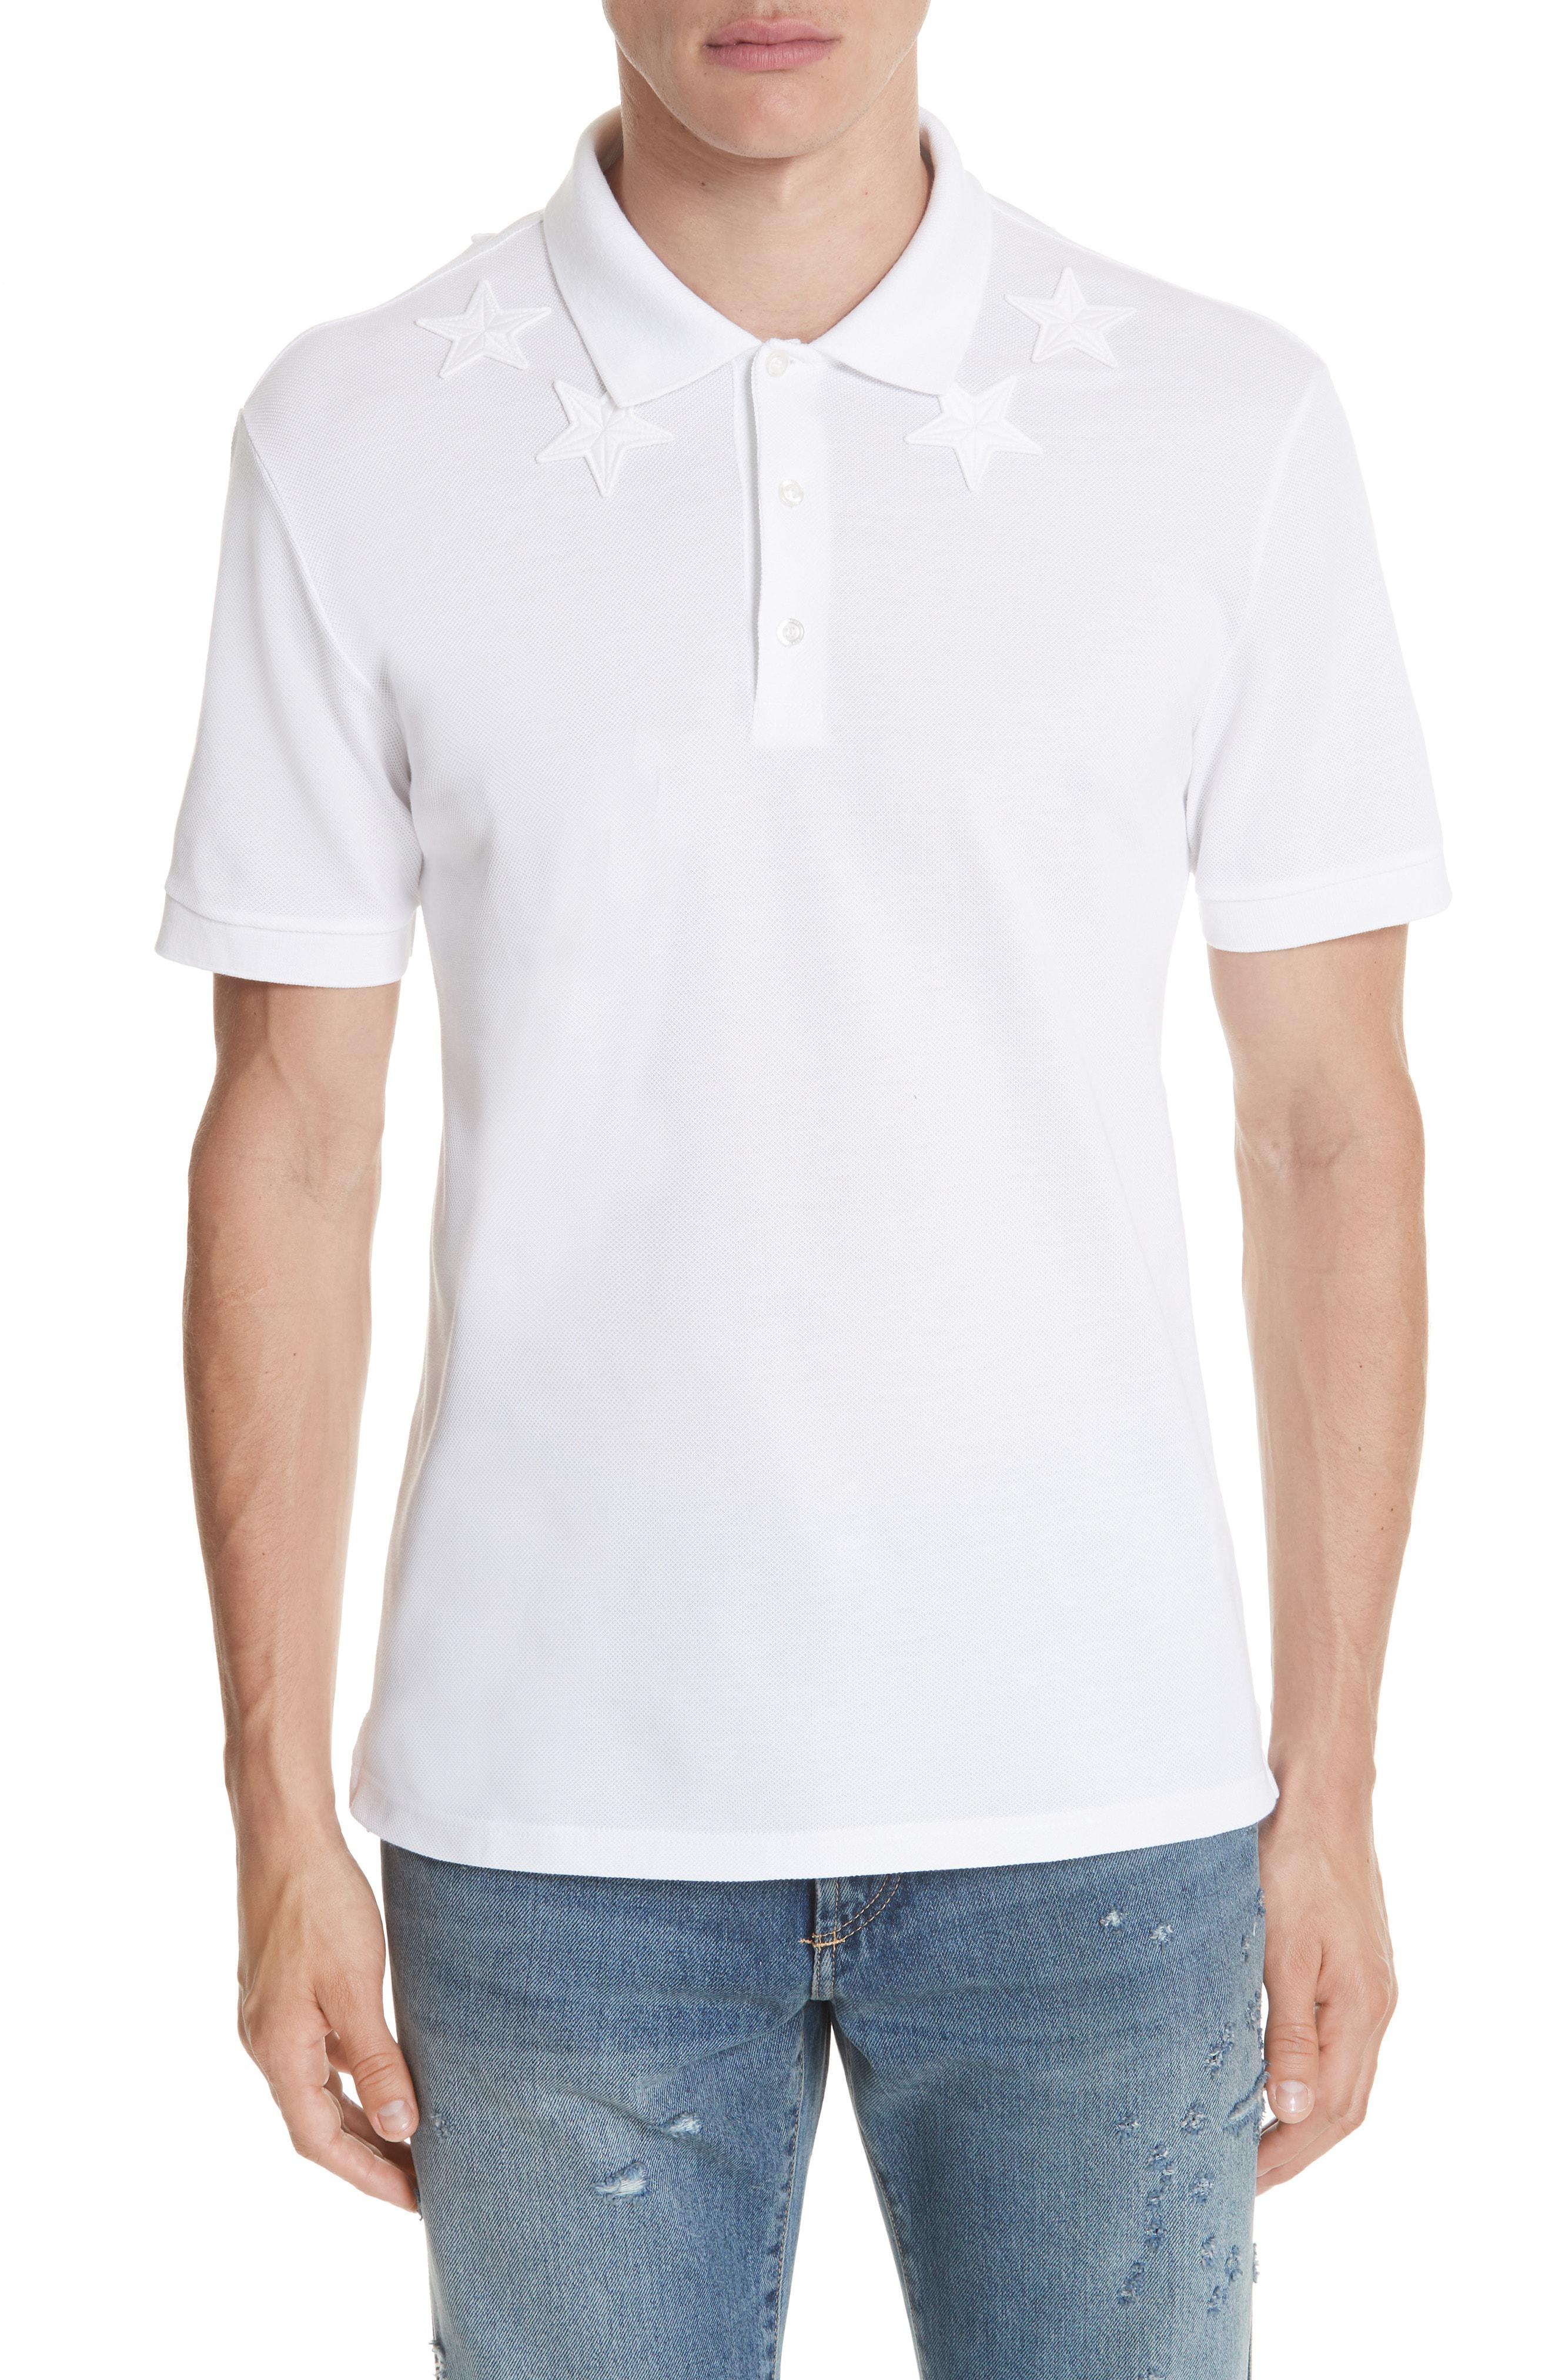 Givenchy Cotton Star Polo Shirt in White for Men - Lyst